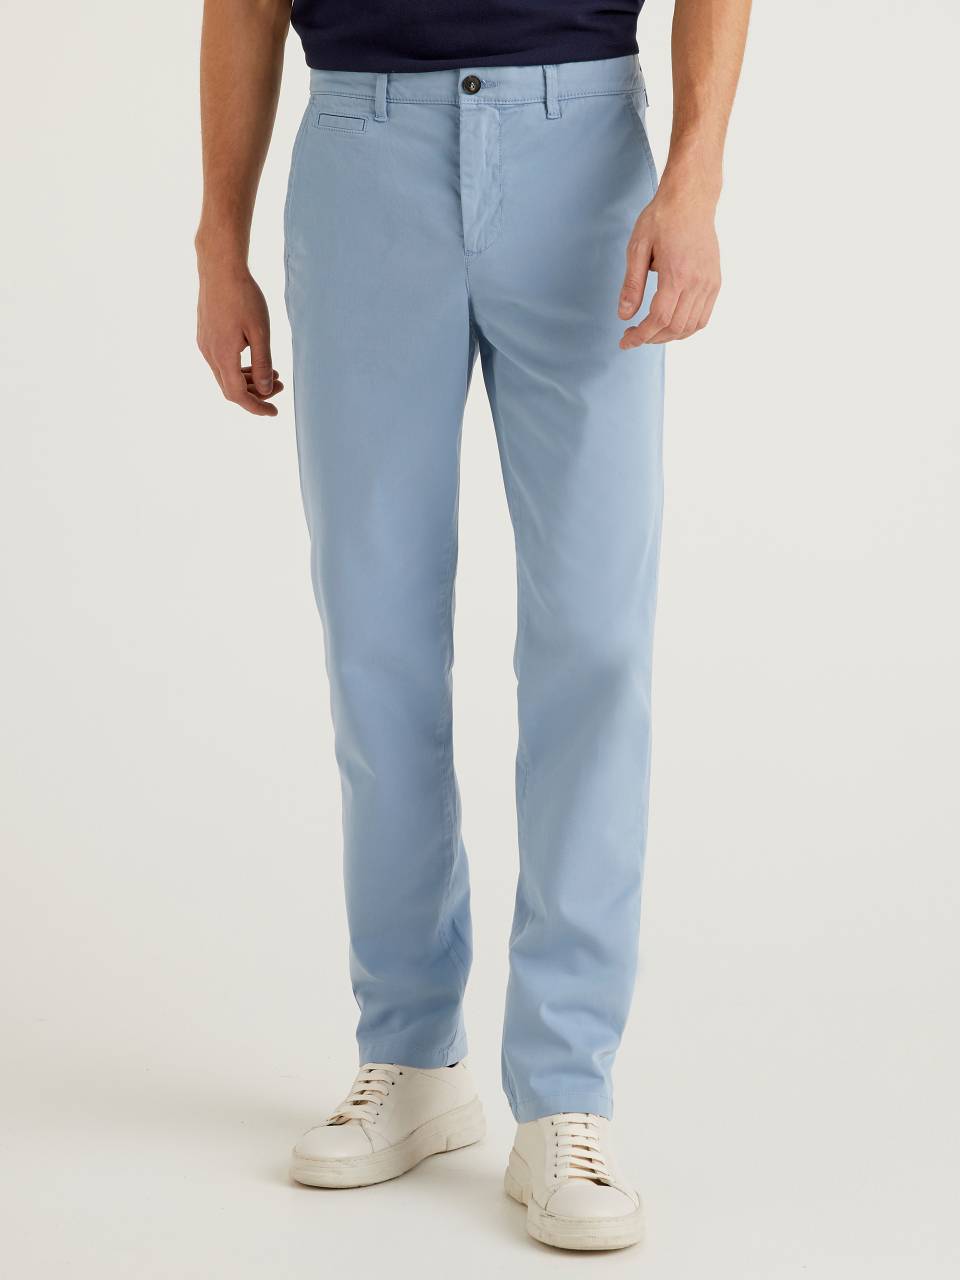 Benetton Air Force blue slim fit chinos. 1